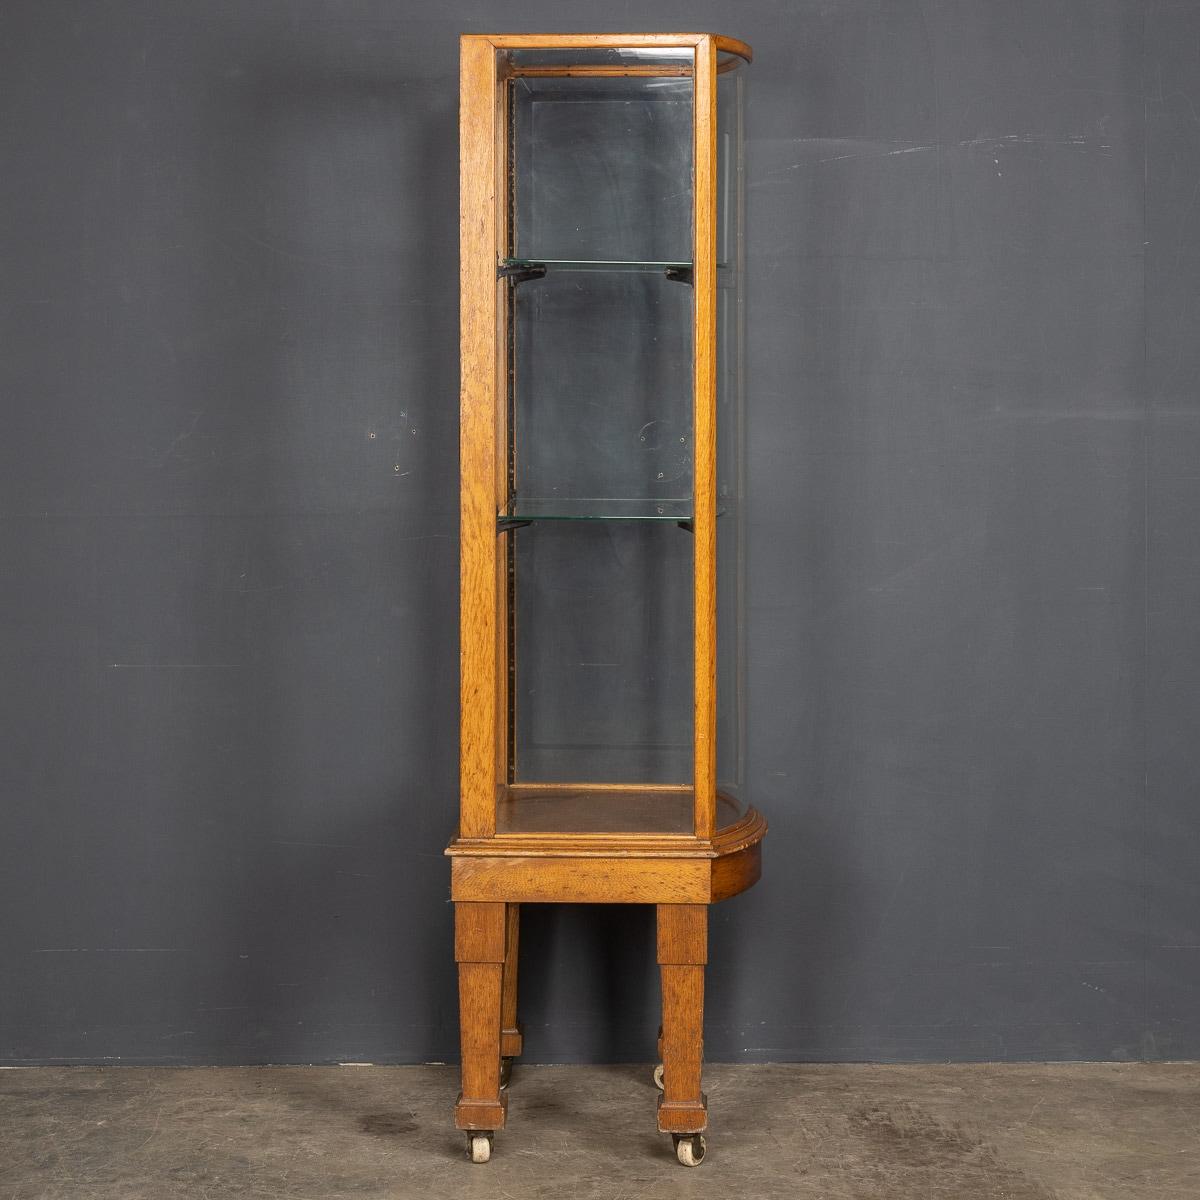 20th Century English Art Deco Display Cabinet, c.1920 For Sale 1